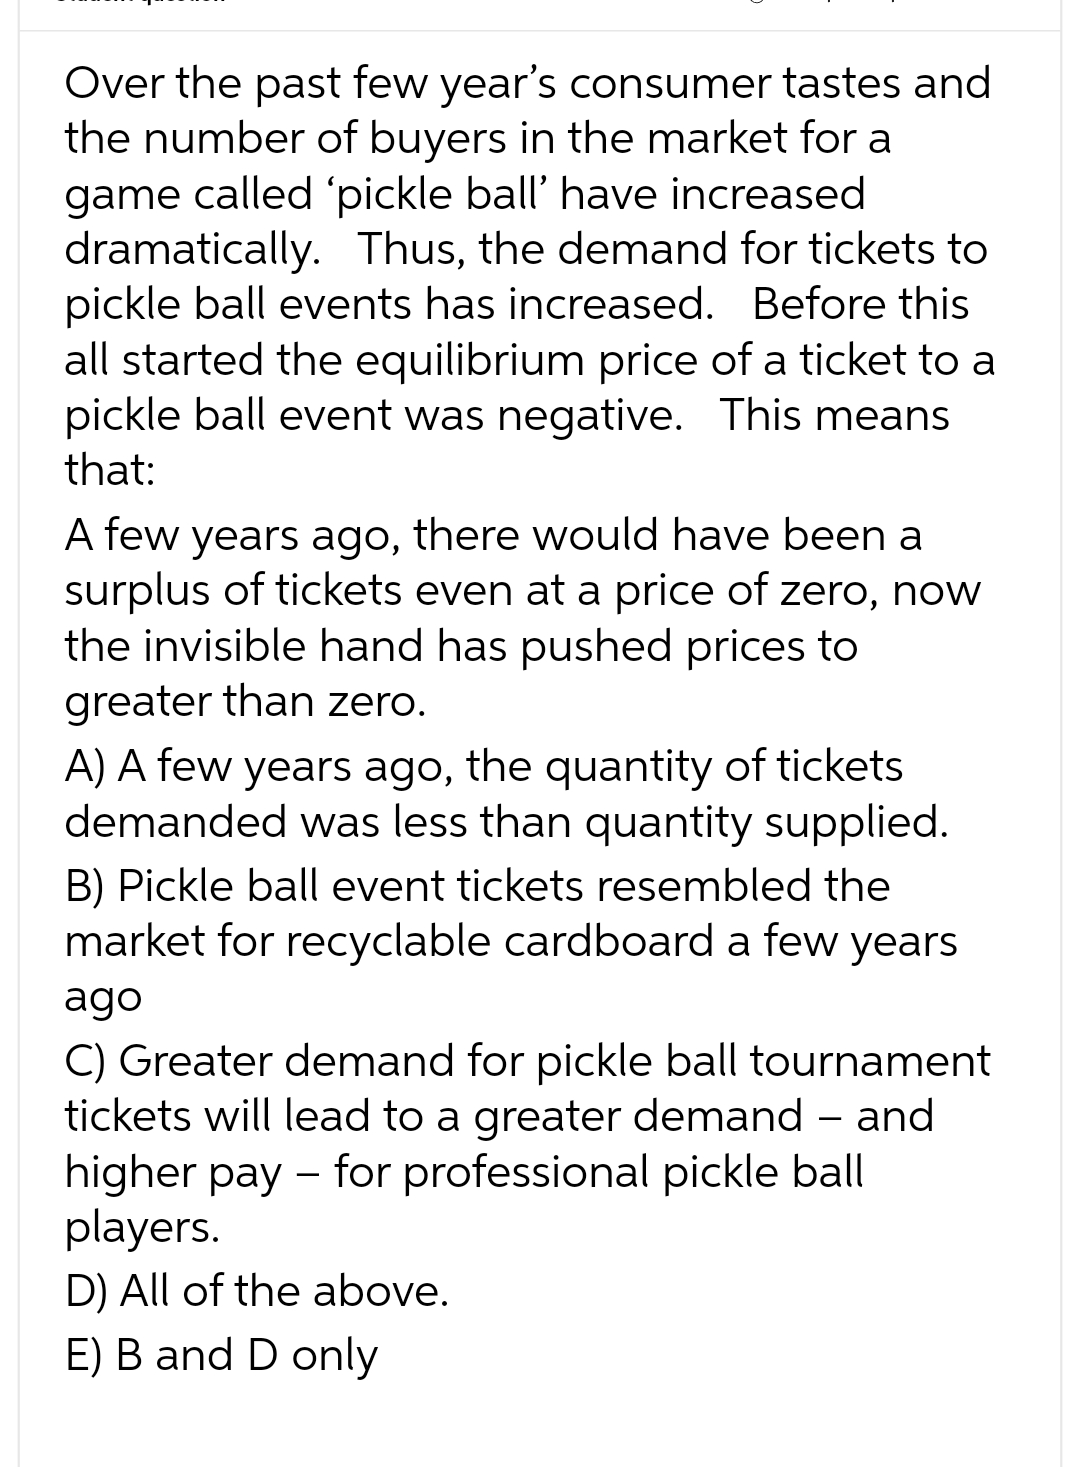 Over the past few year's consumer tastes and
the number of buyers in the market for a
game called 'pickle ball' have increased
dramatically. Thus, the demand for tickets to
pickle ball events has increased. Before this
all started the equilibrium price of a ticket to a
pickle ball event was negative. This means
that:
A few years ago, there would have been a
surplus of tickets even at a price of zero, now
the invisible hand has pushed prices to
greater than zero.
A) A few years ago, the quantity of tickets
demanded was less than quantity supplied.
B) Pickle ball event tickets resembled the
market for recyclable cardboard a few years
ago
C) Greater demand for pickle ball tournament
tickets will lead to a greater demand - and
higher pay - for professional pickle ball
players.
D) All of the above.
E) B and D only